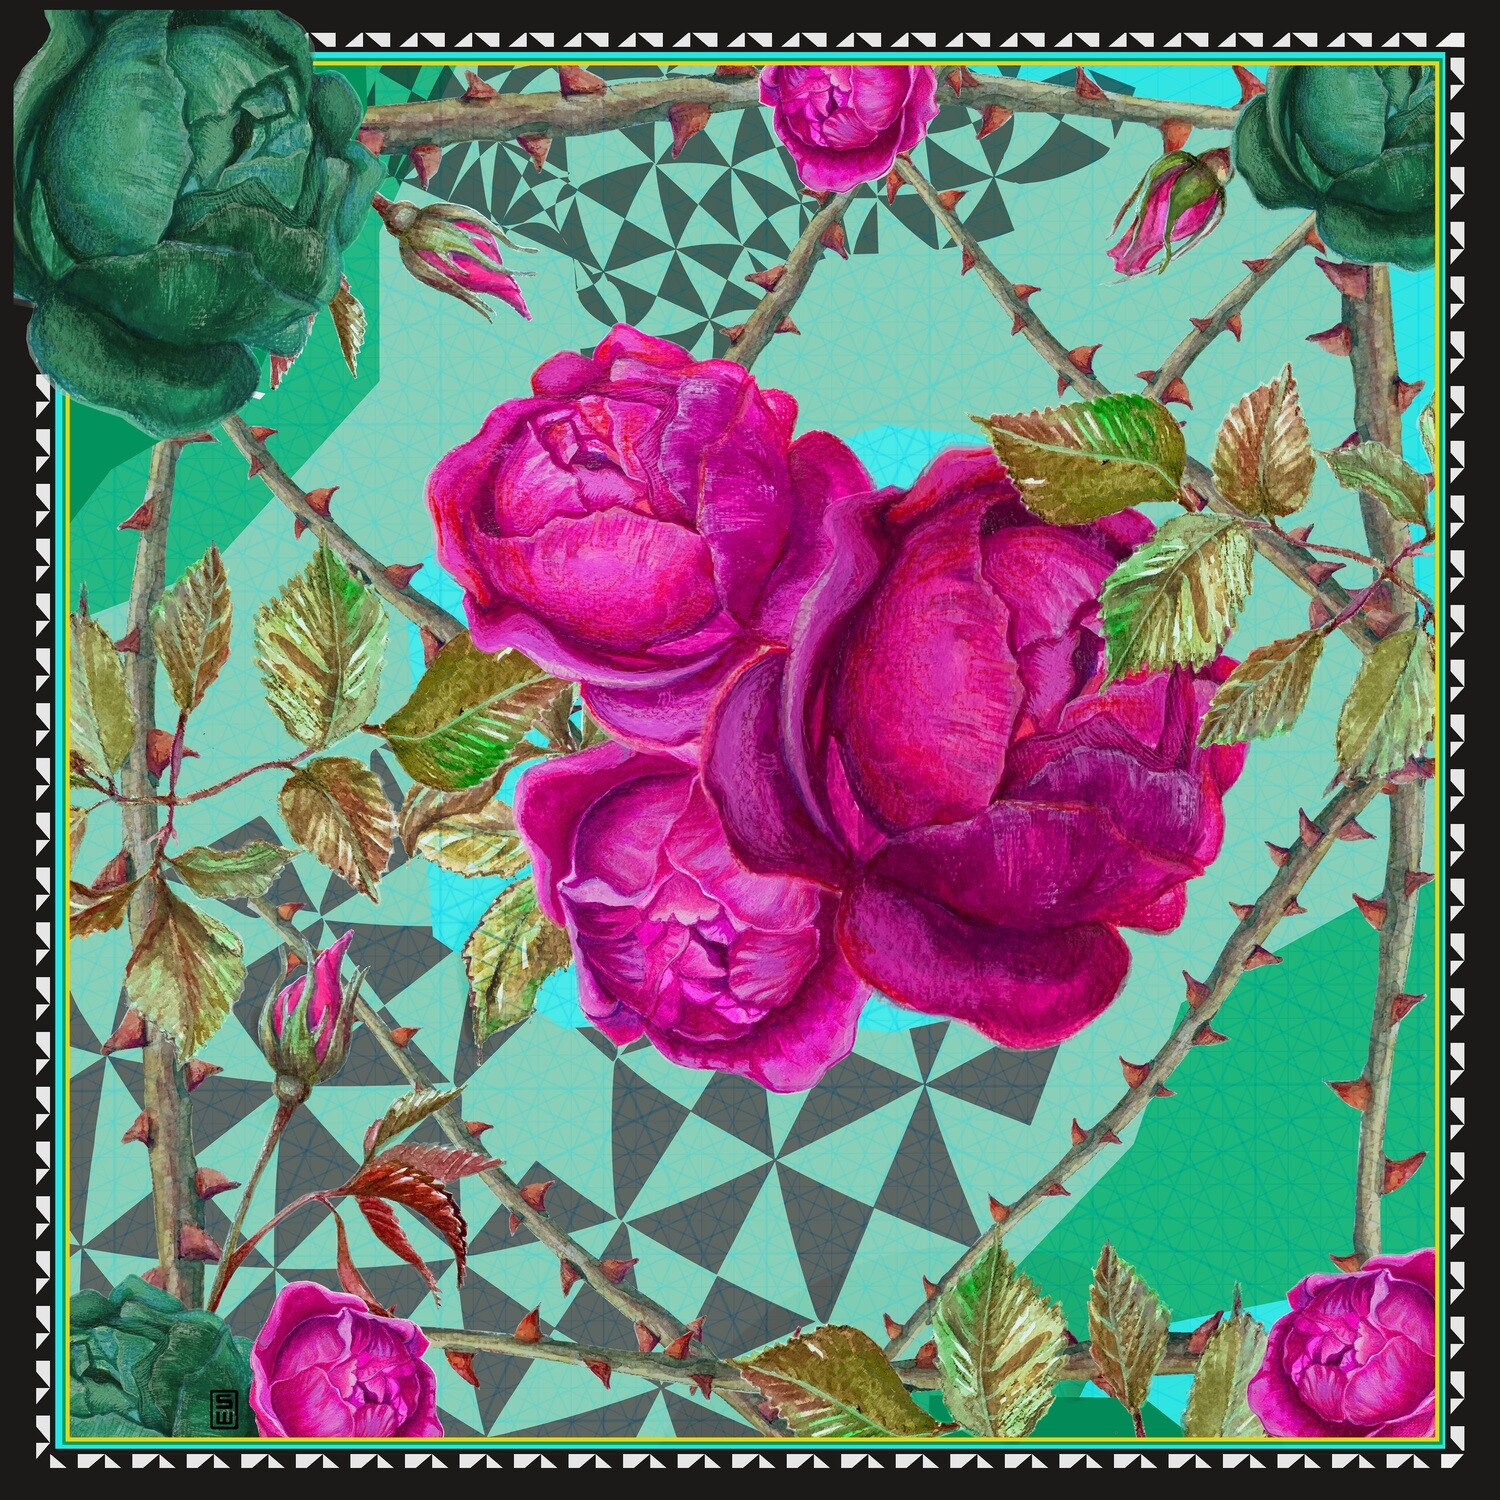 Tuch  "Roses in the garden"